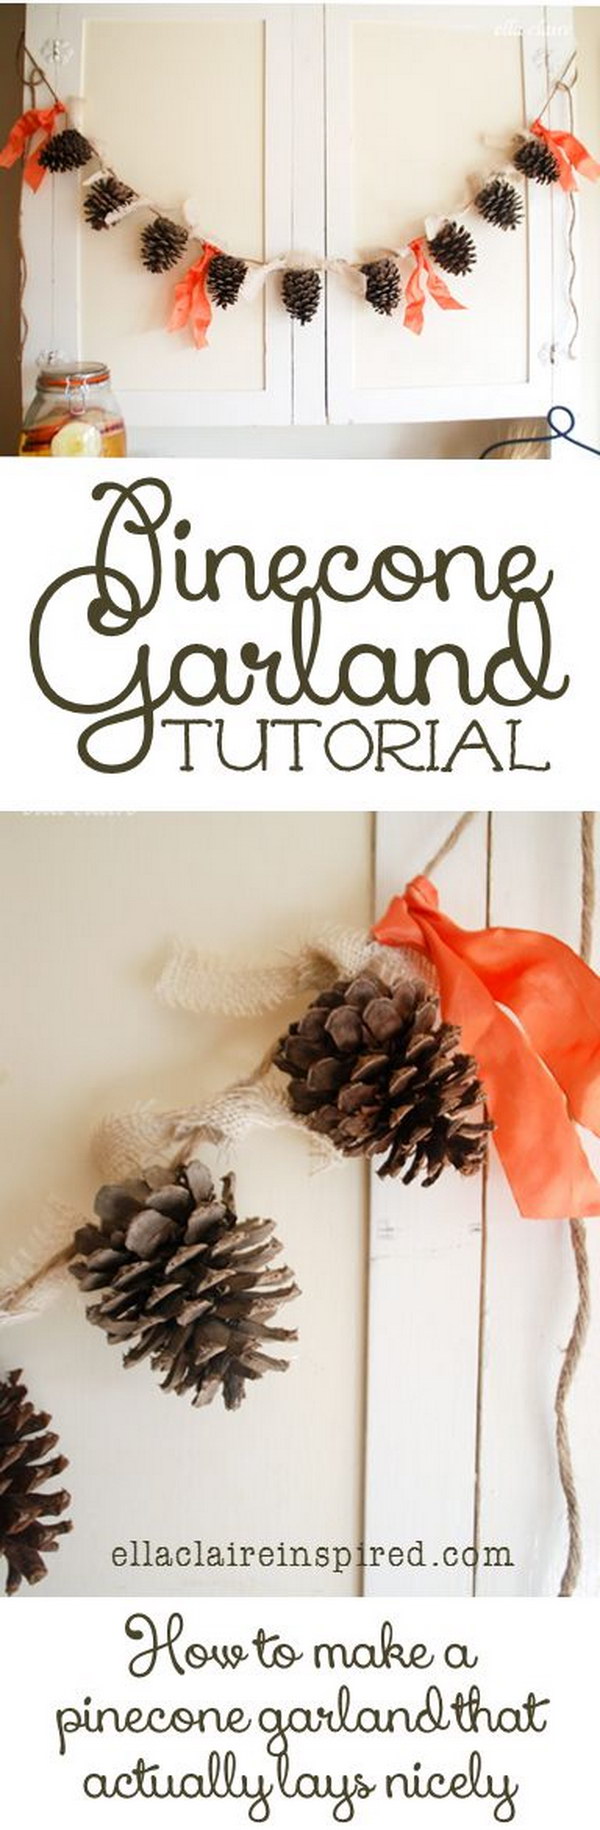 Cute and Simple Pinecone Garland Tutorial 